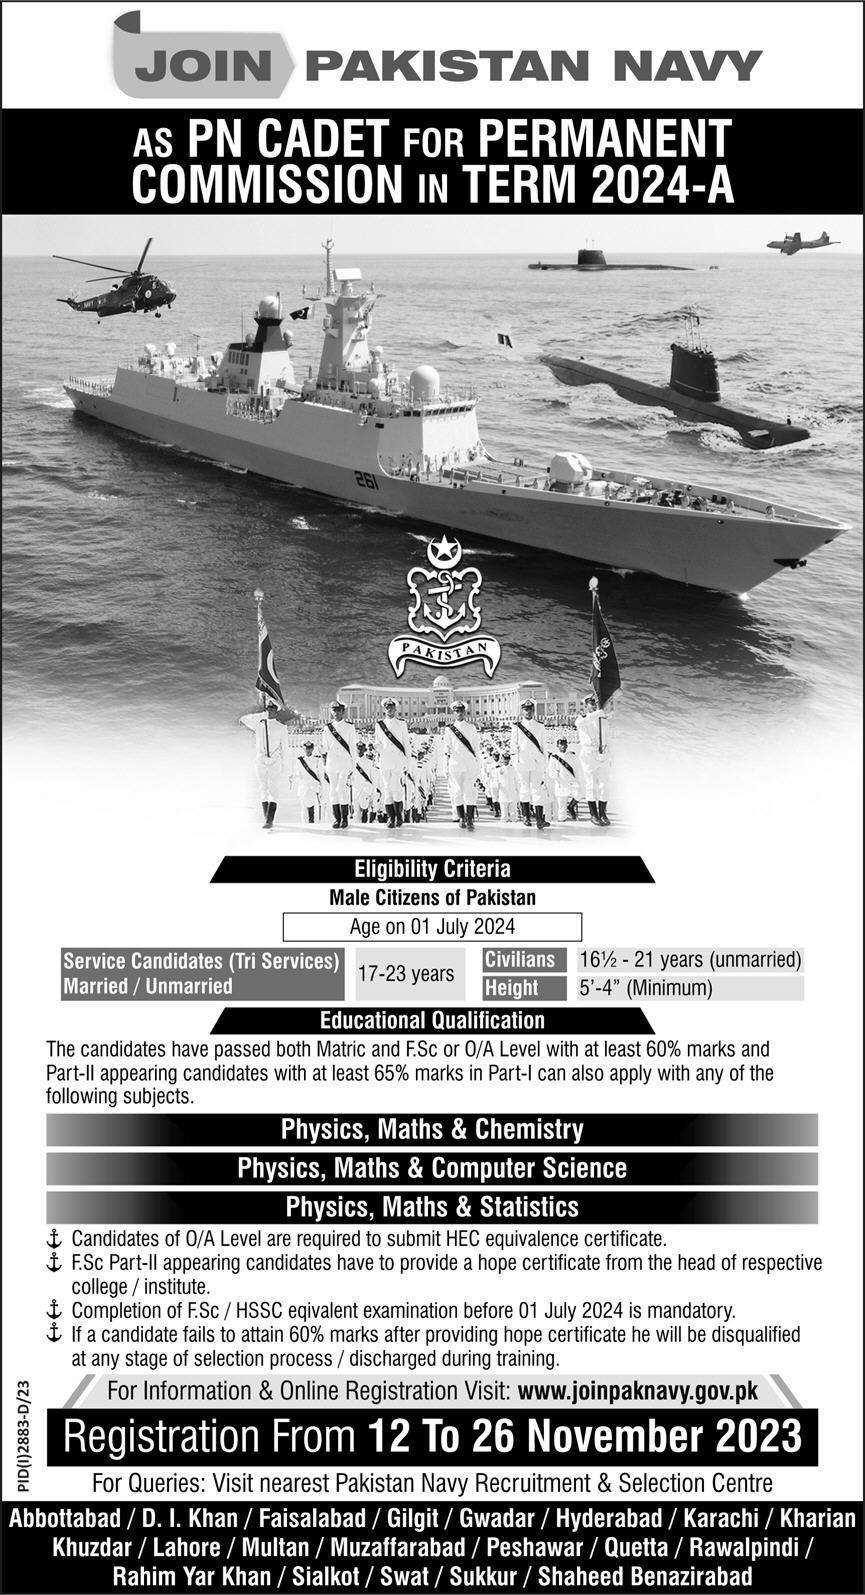 Online Registration to Join Pakistan Navy as PN Cadet Permanent Commission 2024-A